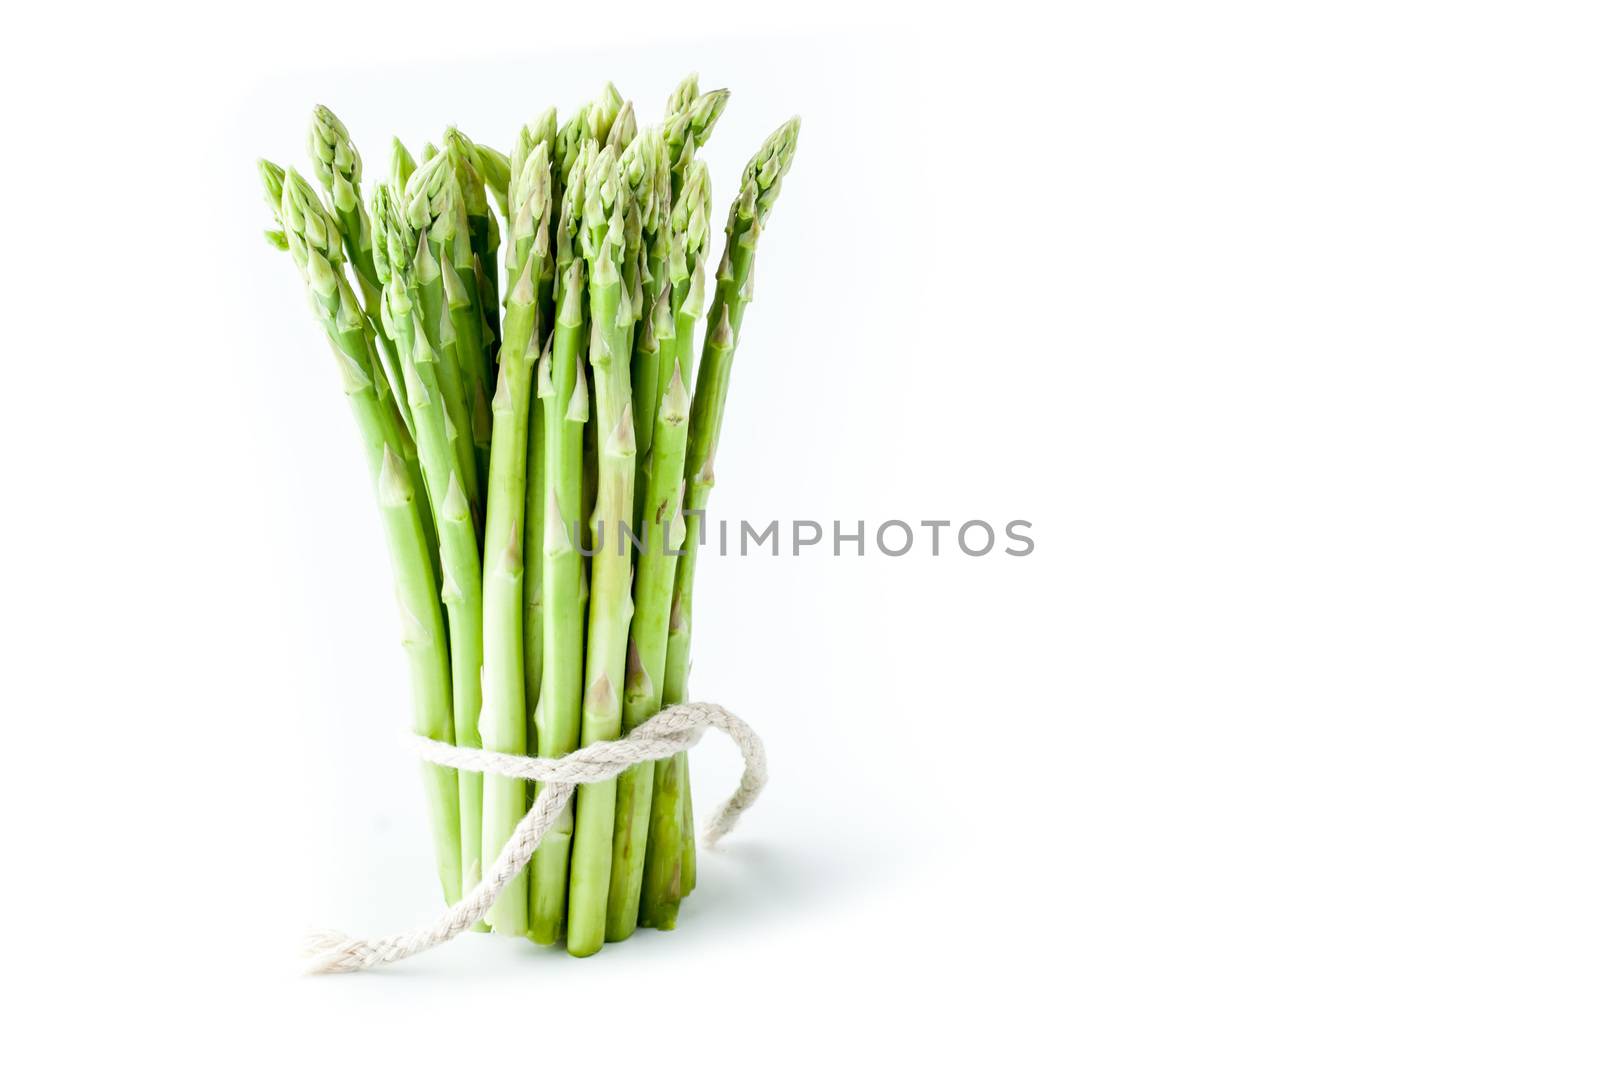 Bundle of asparagus at the left of white background horizontal